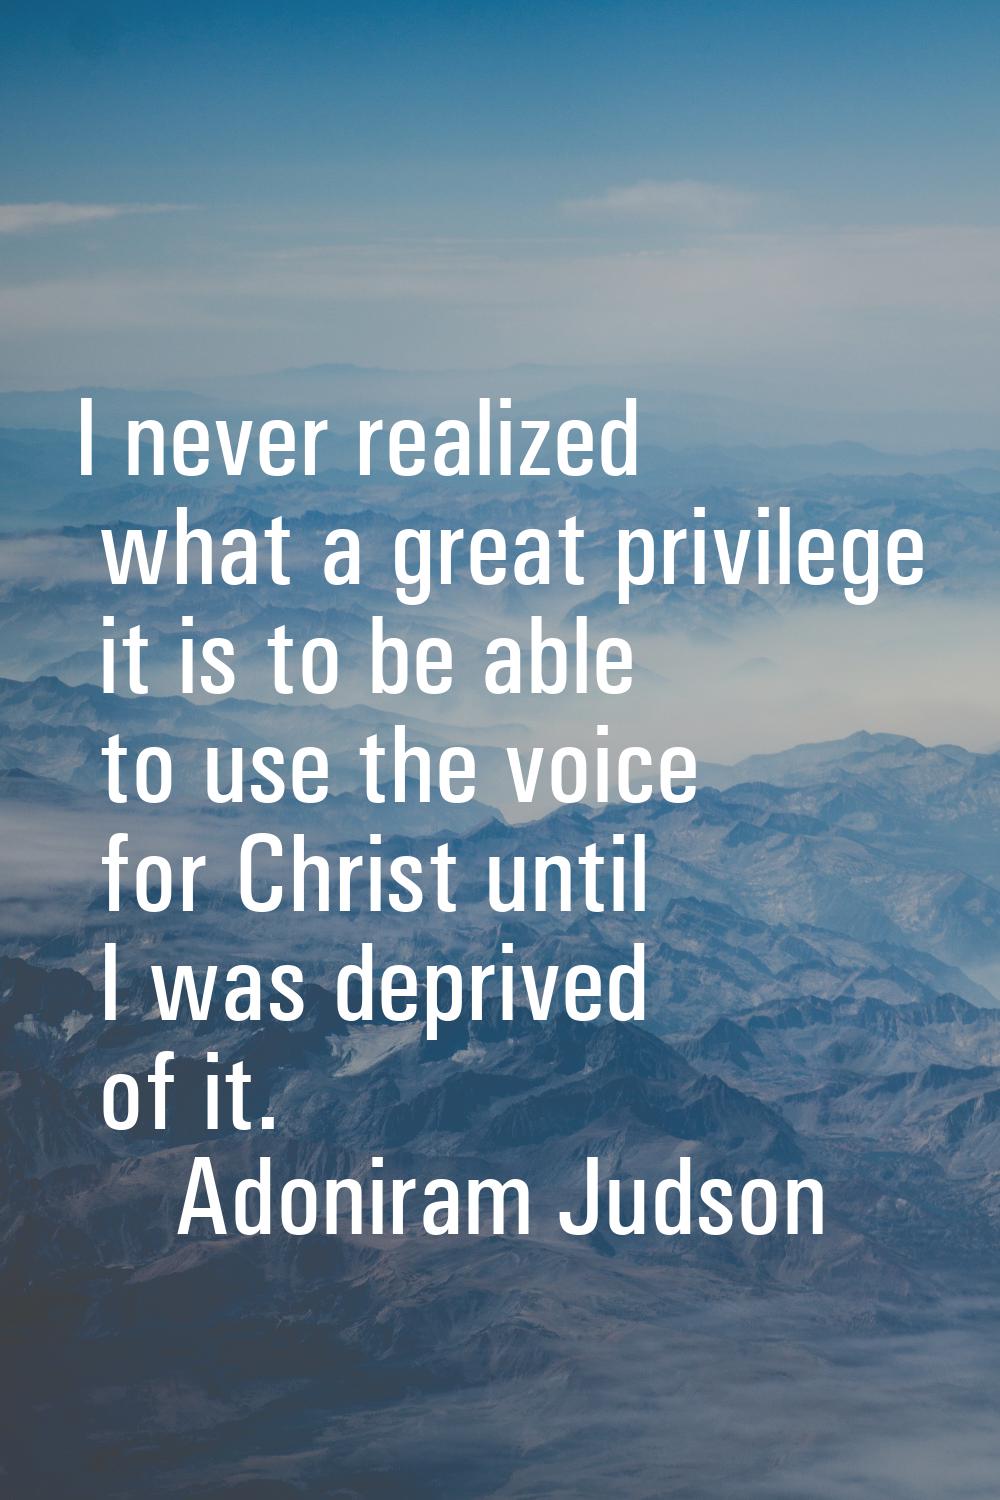 I never realized what a great privilege it is to be able to use the voice for Christ until I was de